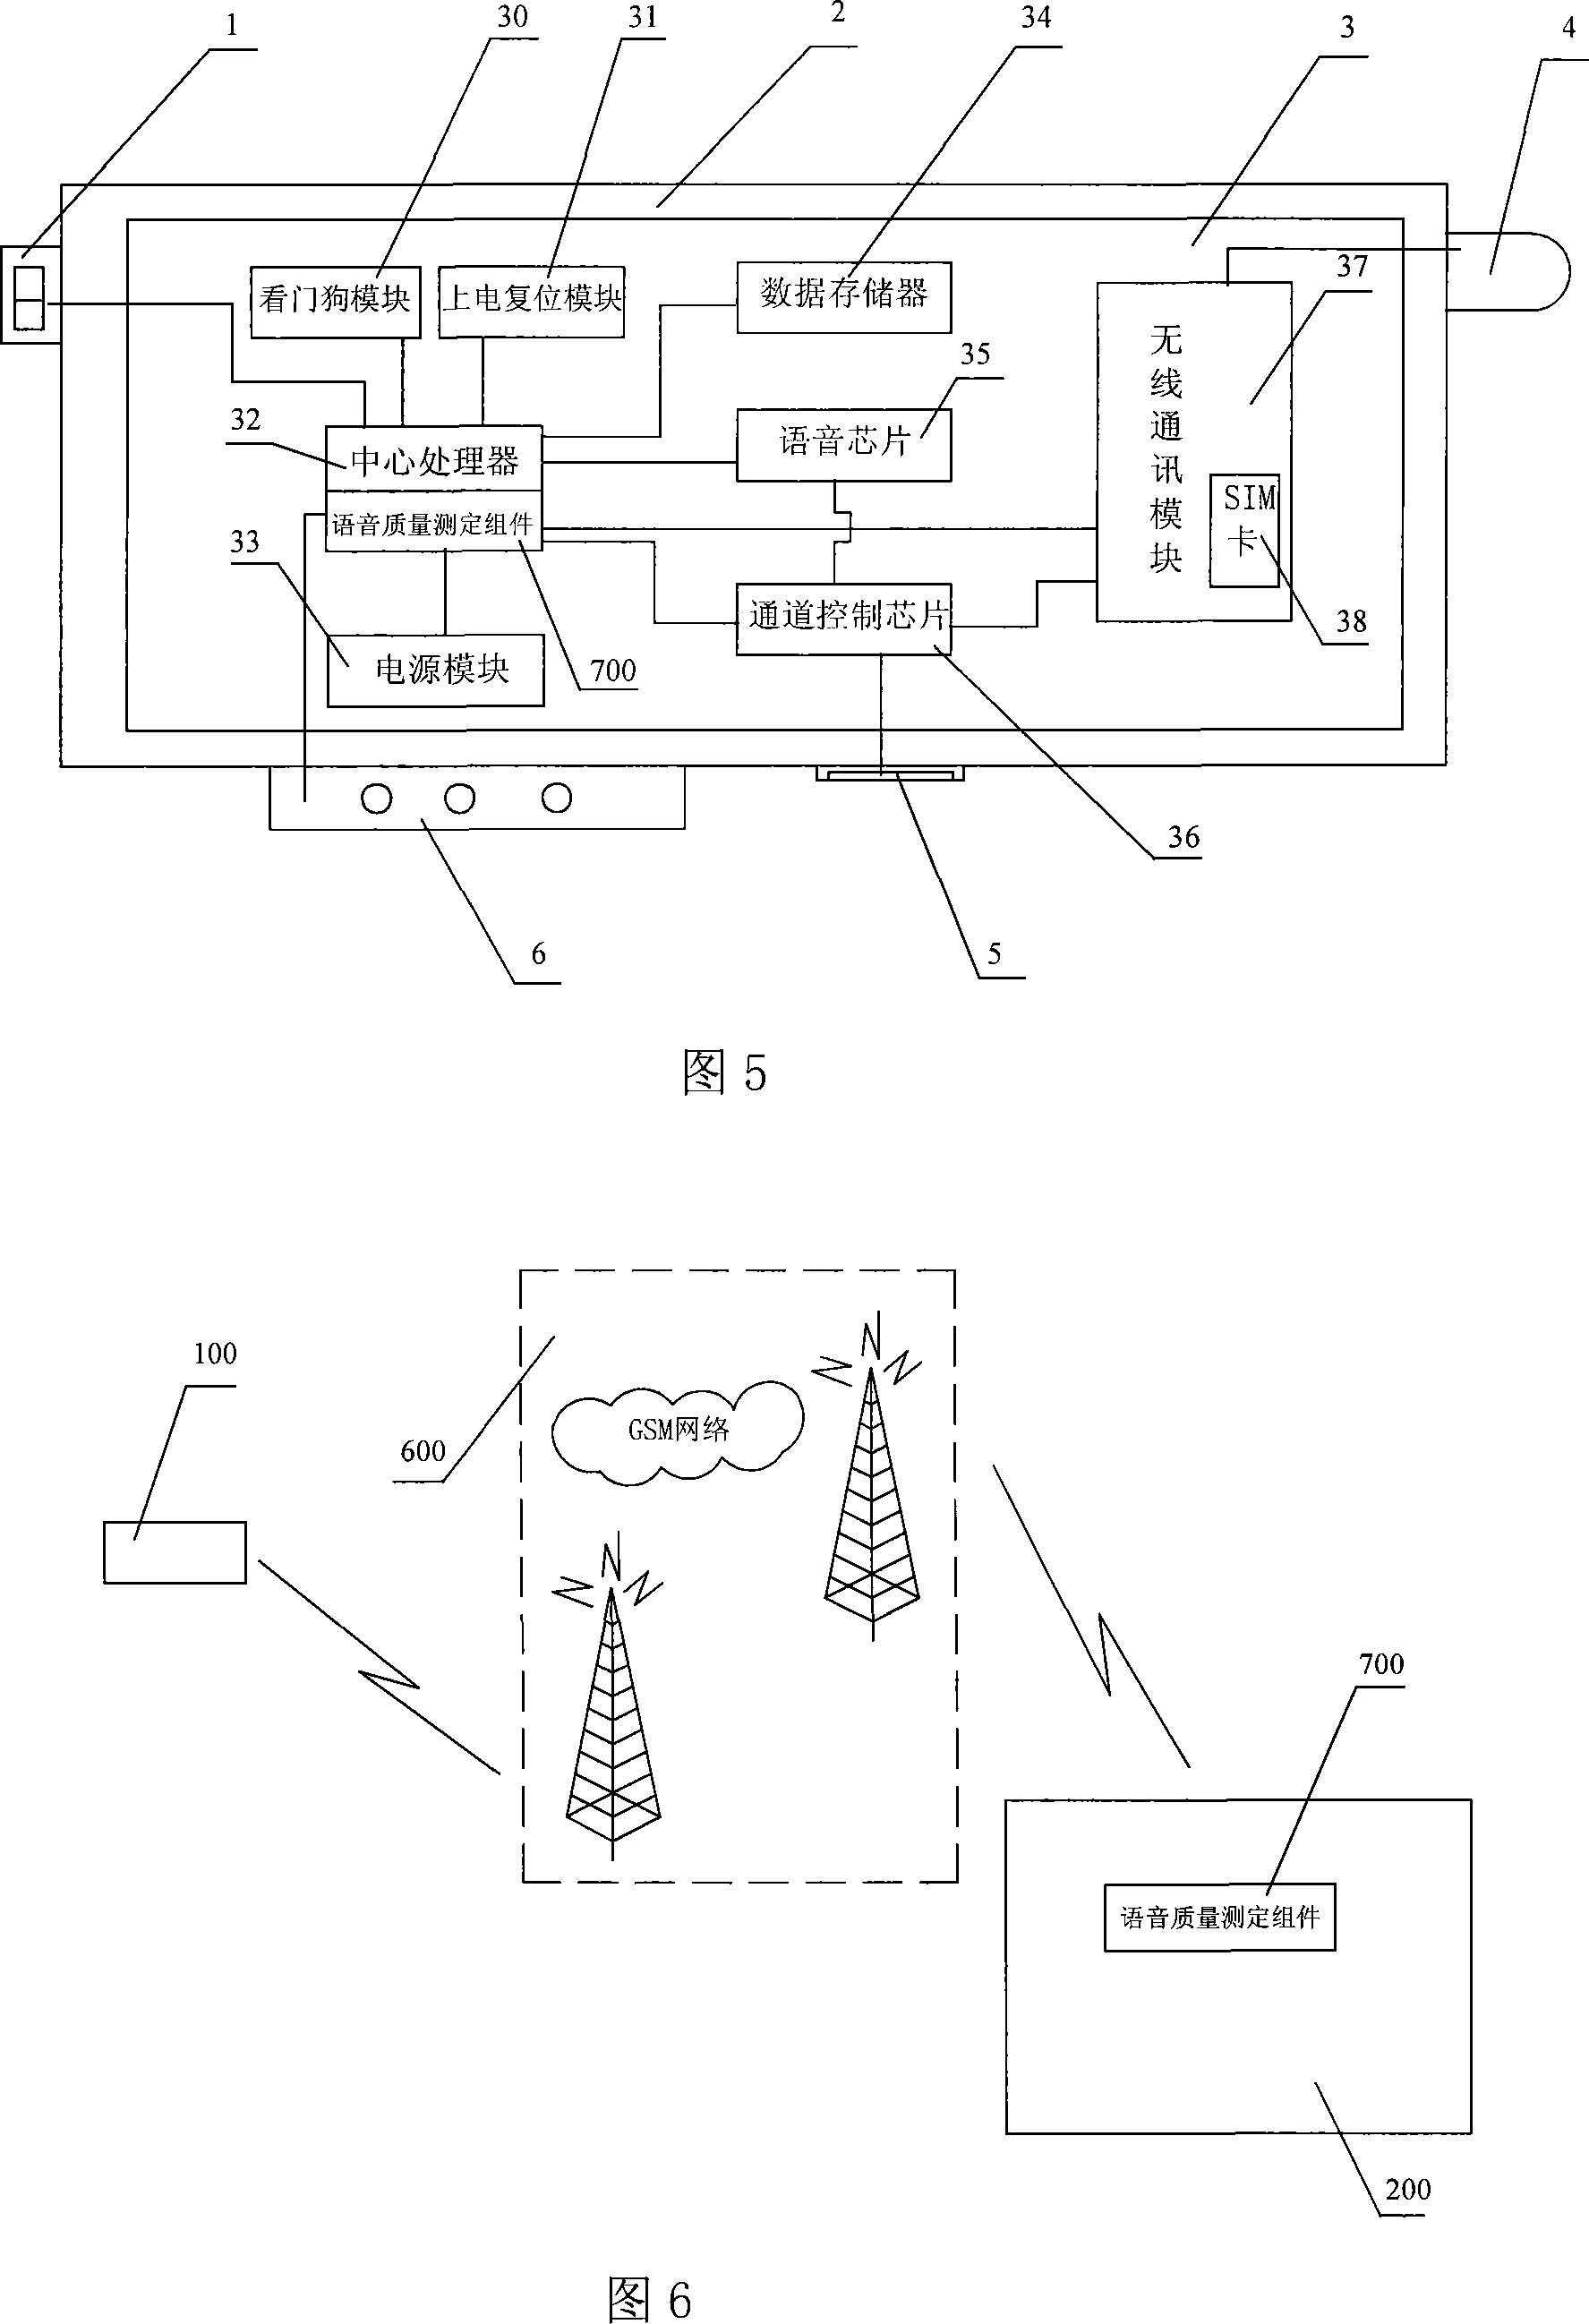 Mobile communications network remote control detecting system and speech quality remote detecting method